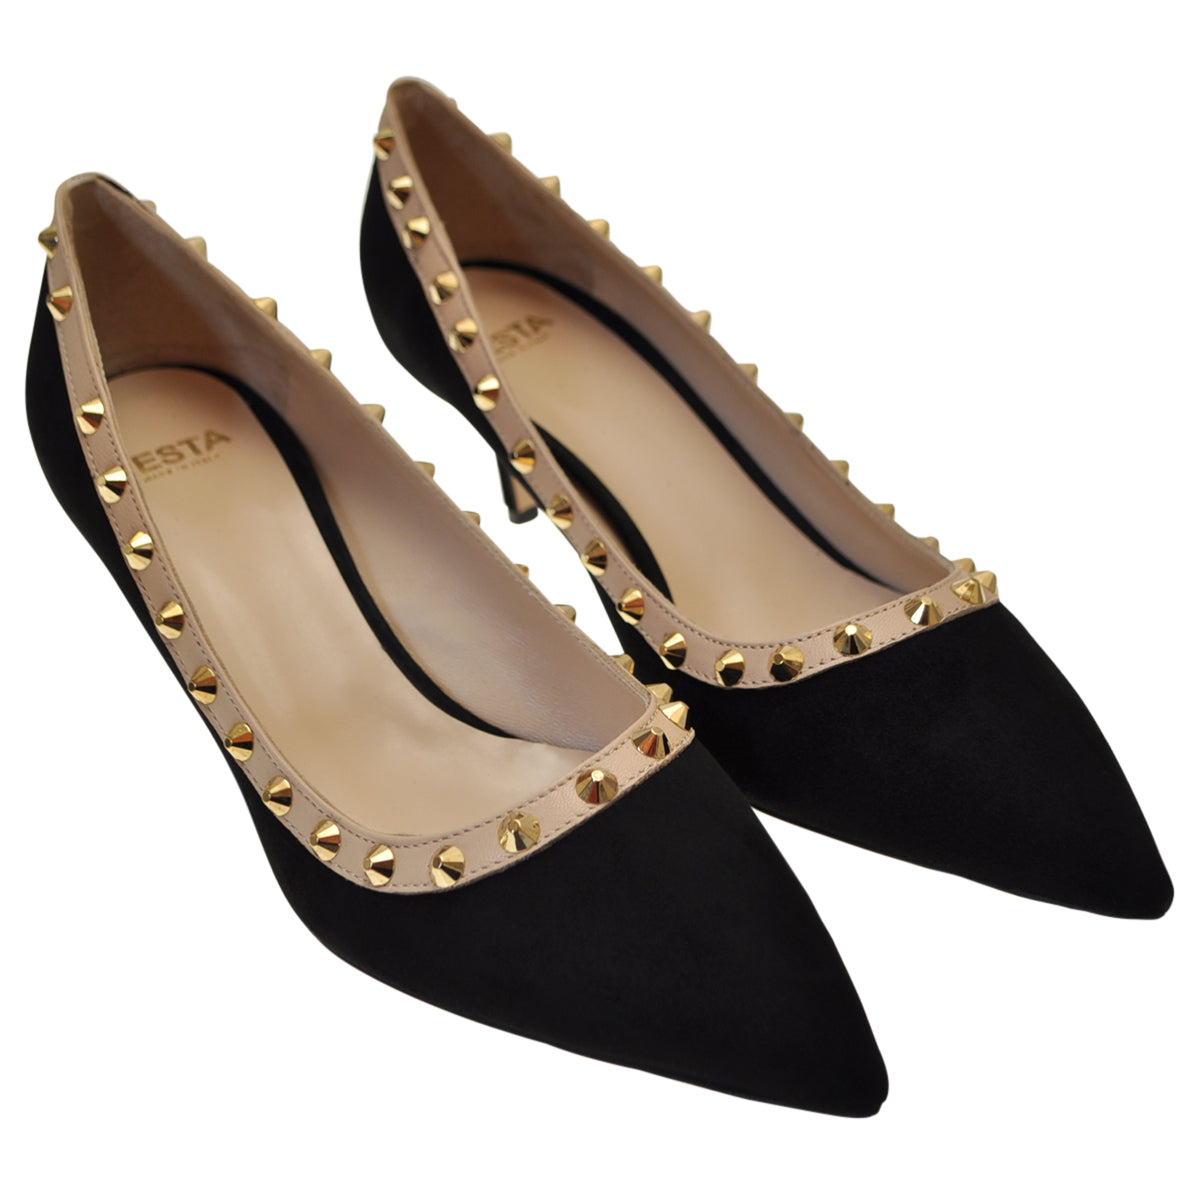 Black Suede kitten pumps with contrasting beige lining and studs. 